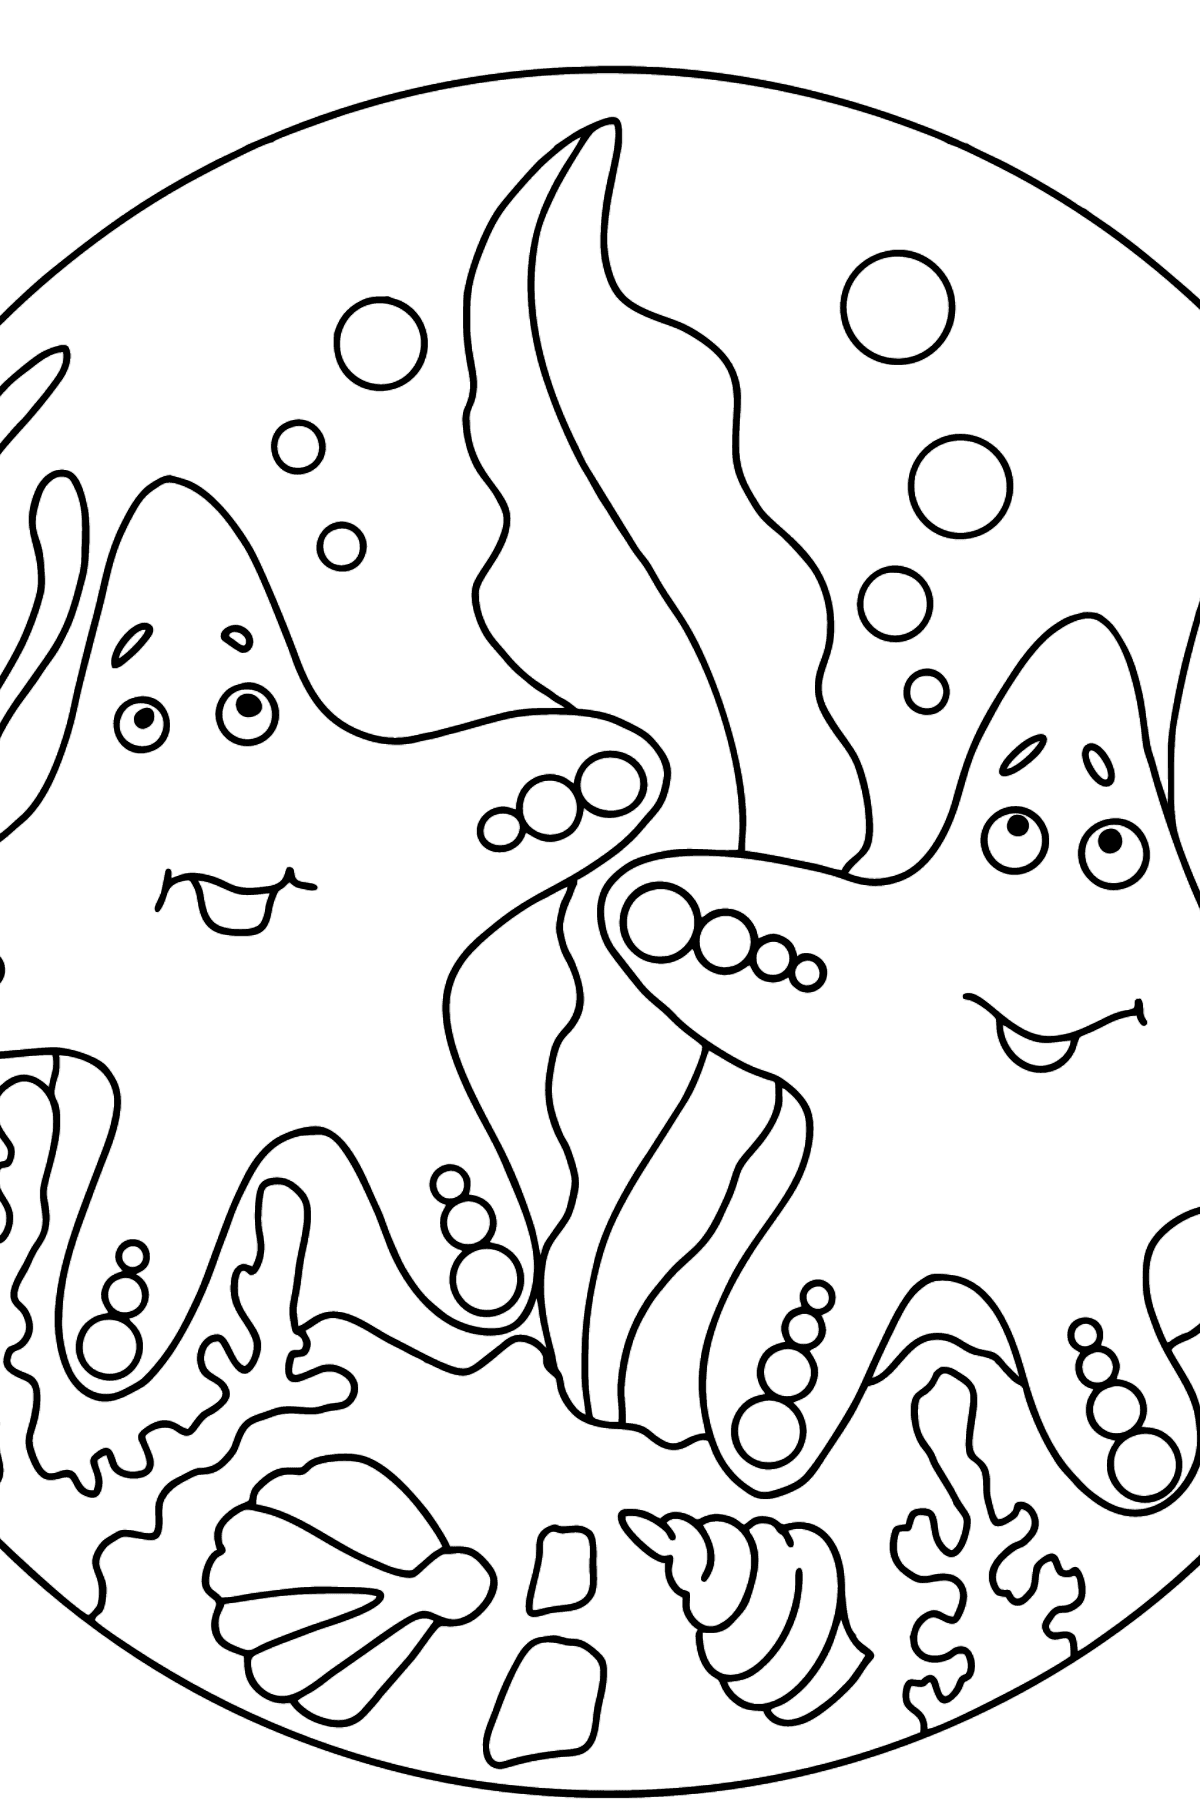 Two Starfish Coloring Page (Easy) - Coloring Pages for Kids